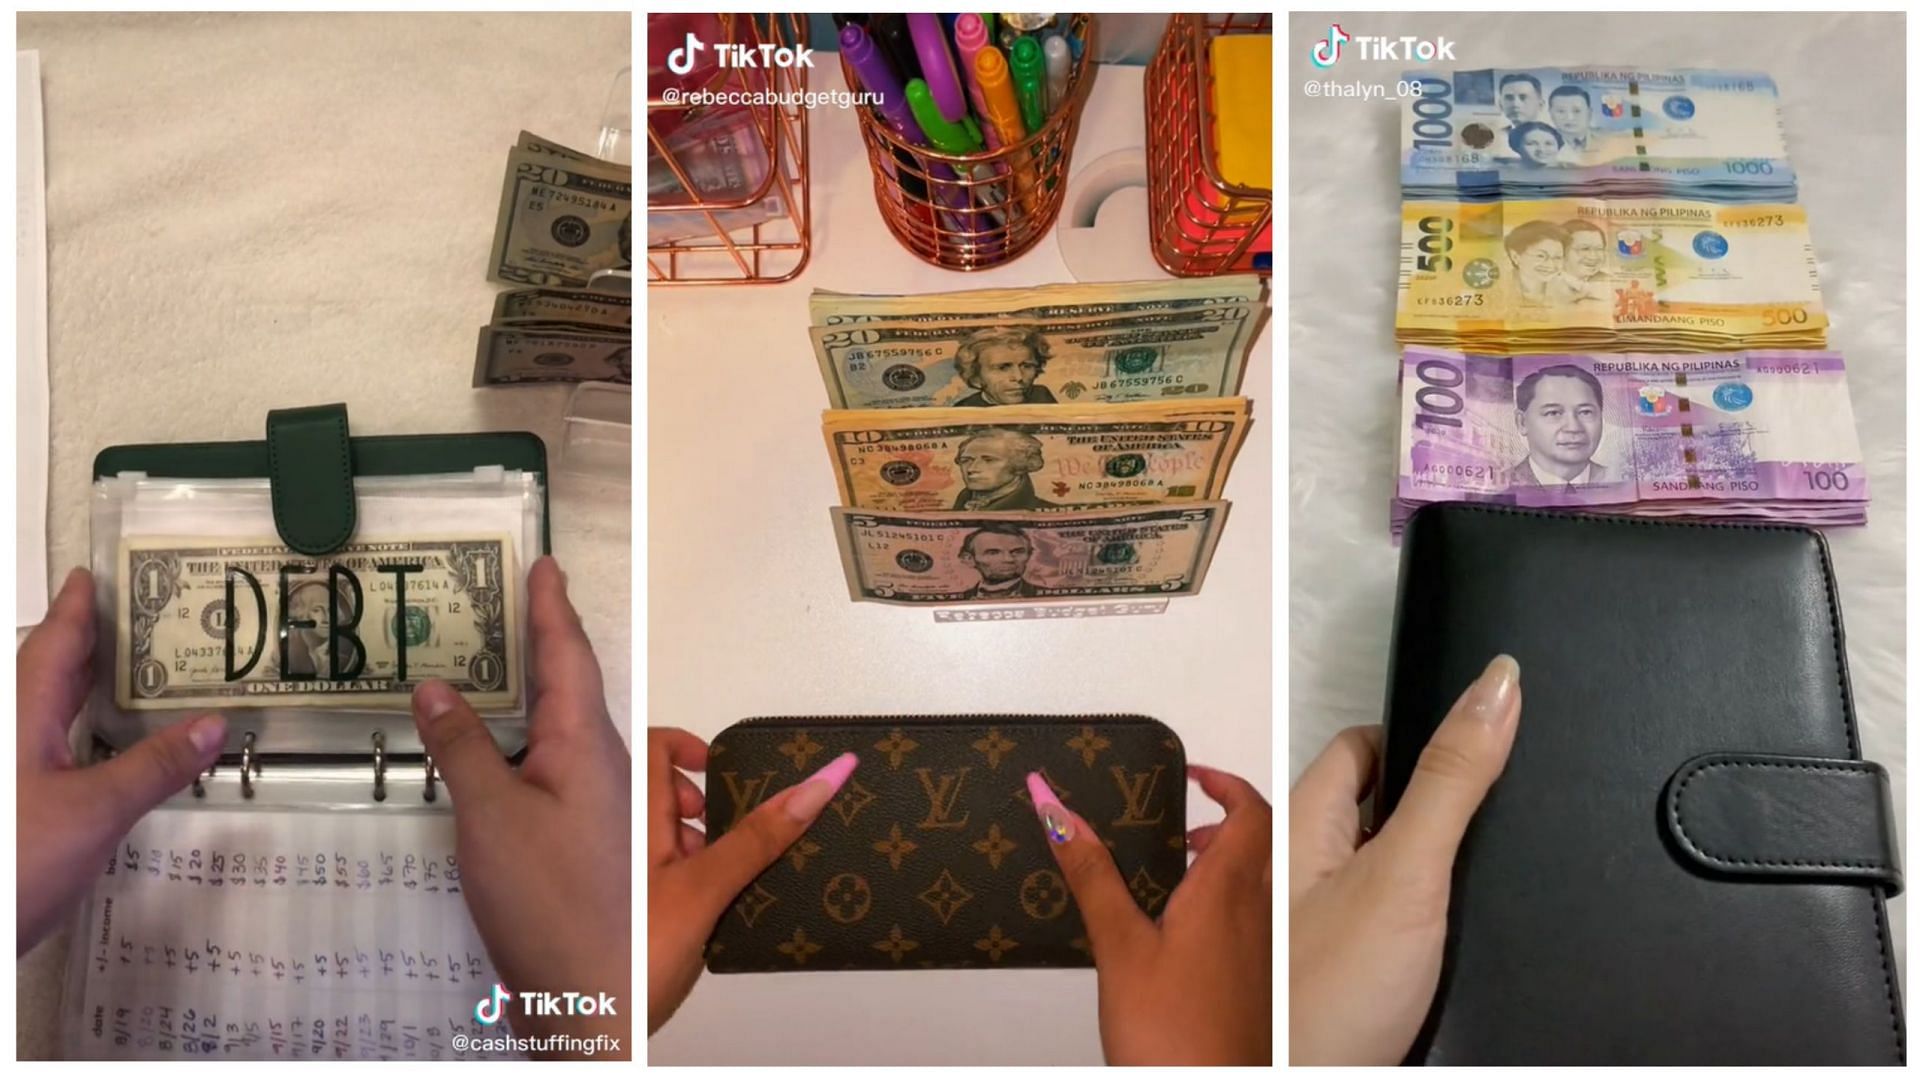 How 'cash stuffing' is helping TikTok creators beat inflation, pay